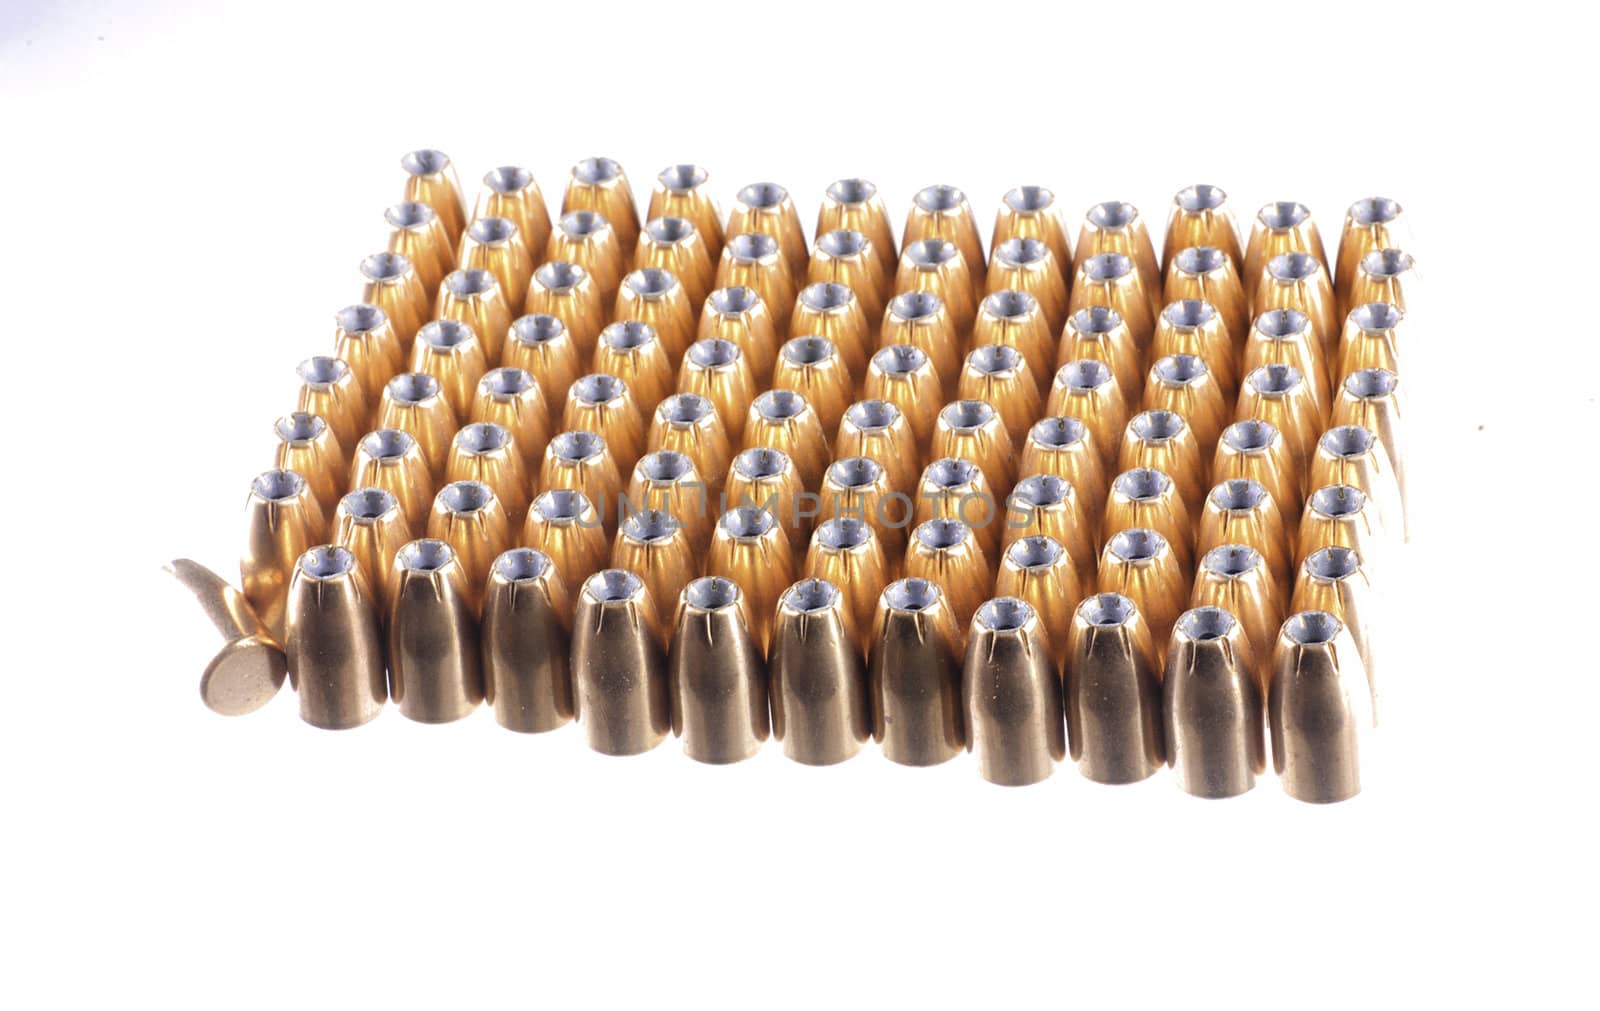 9mm bullets lined up in rows, isolated on white